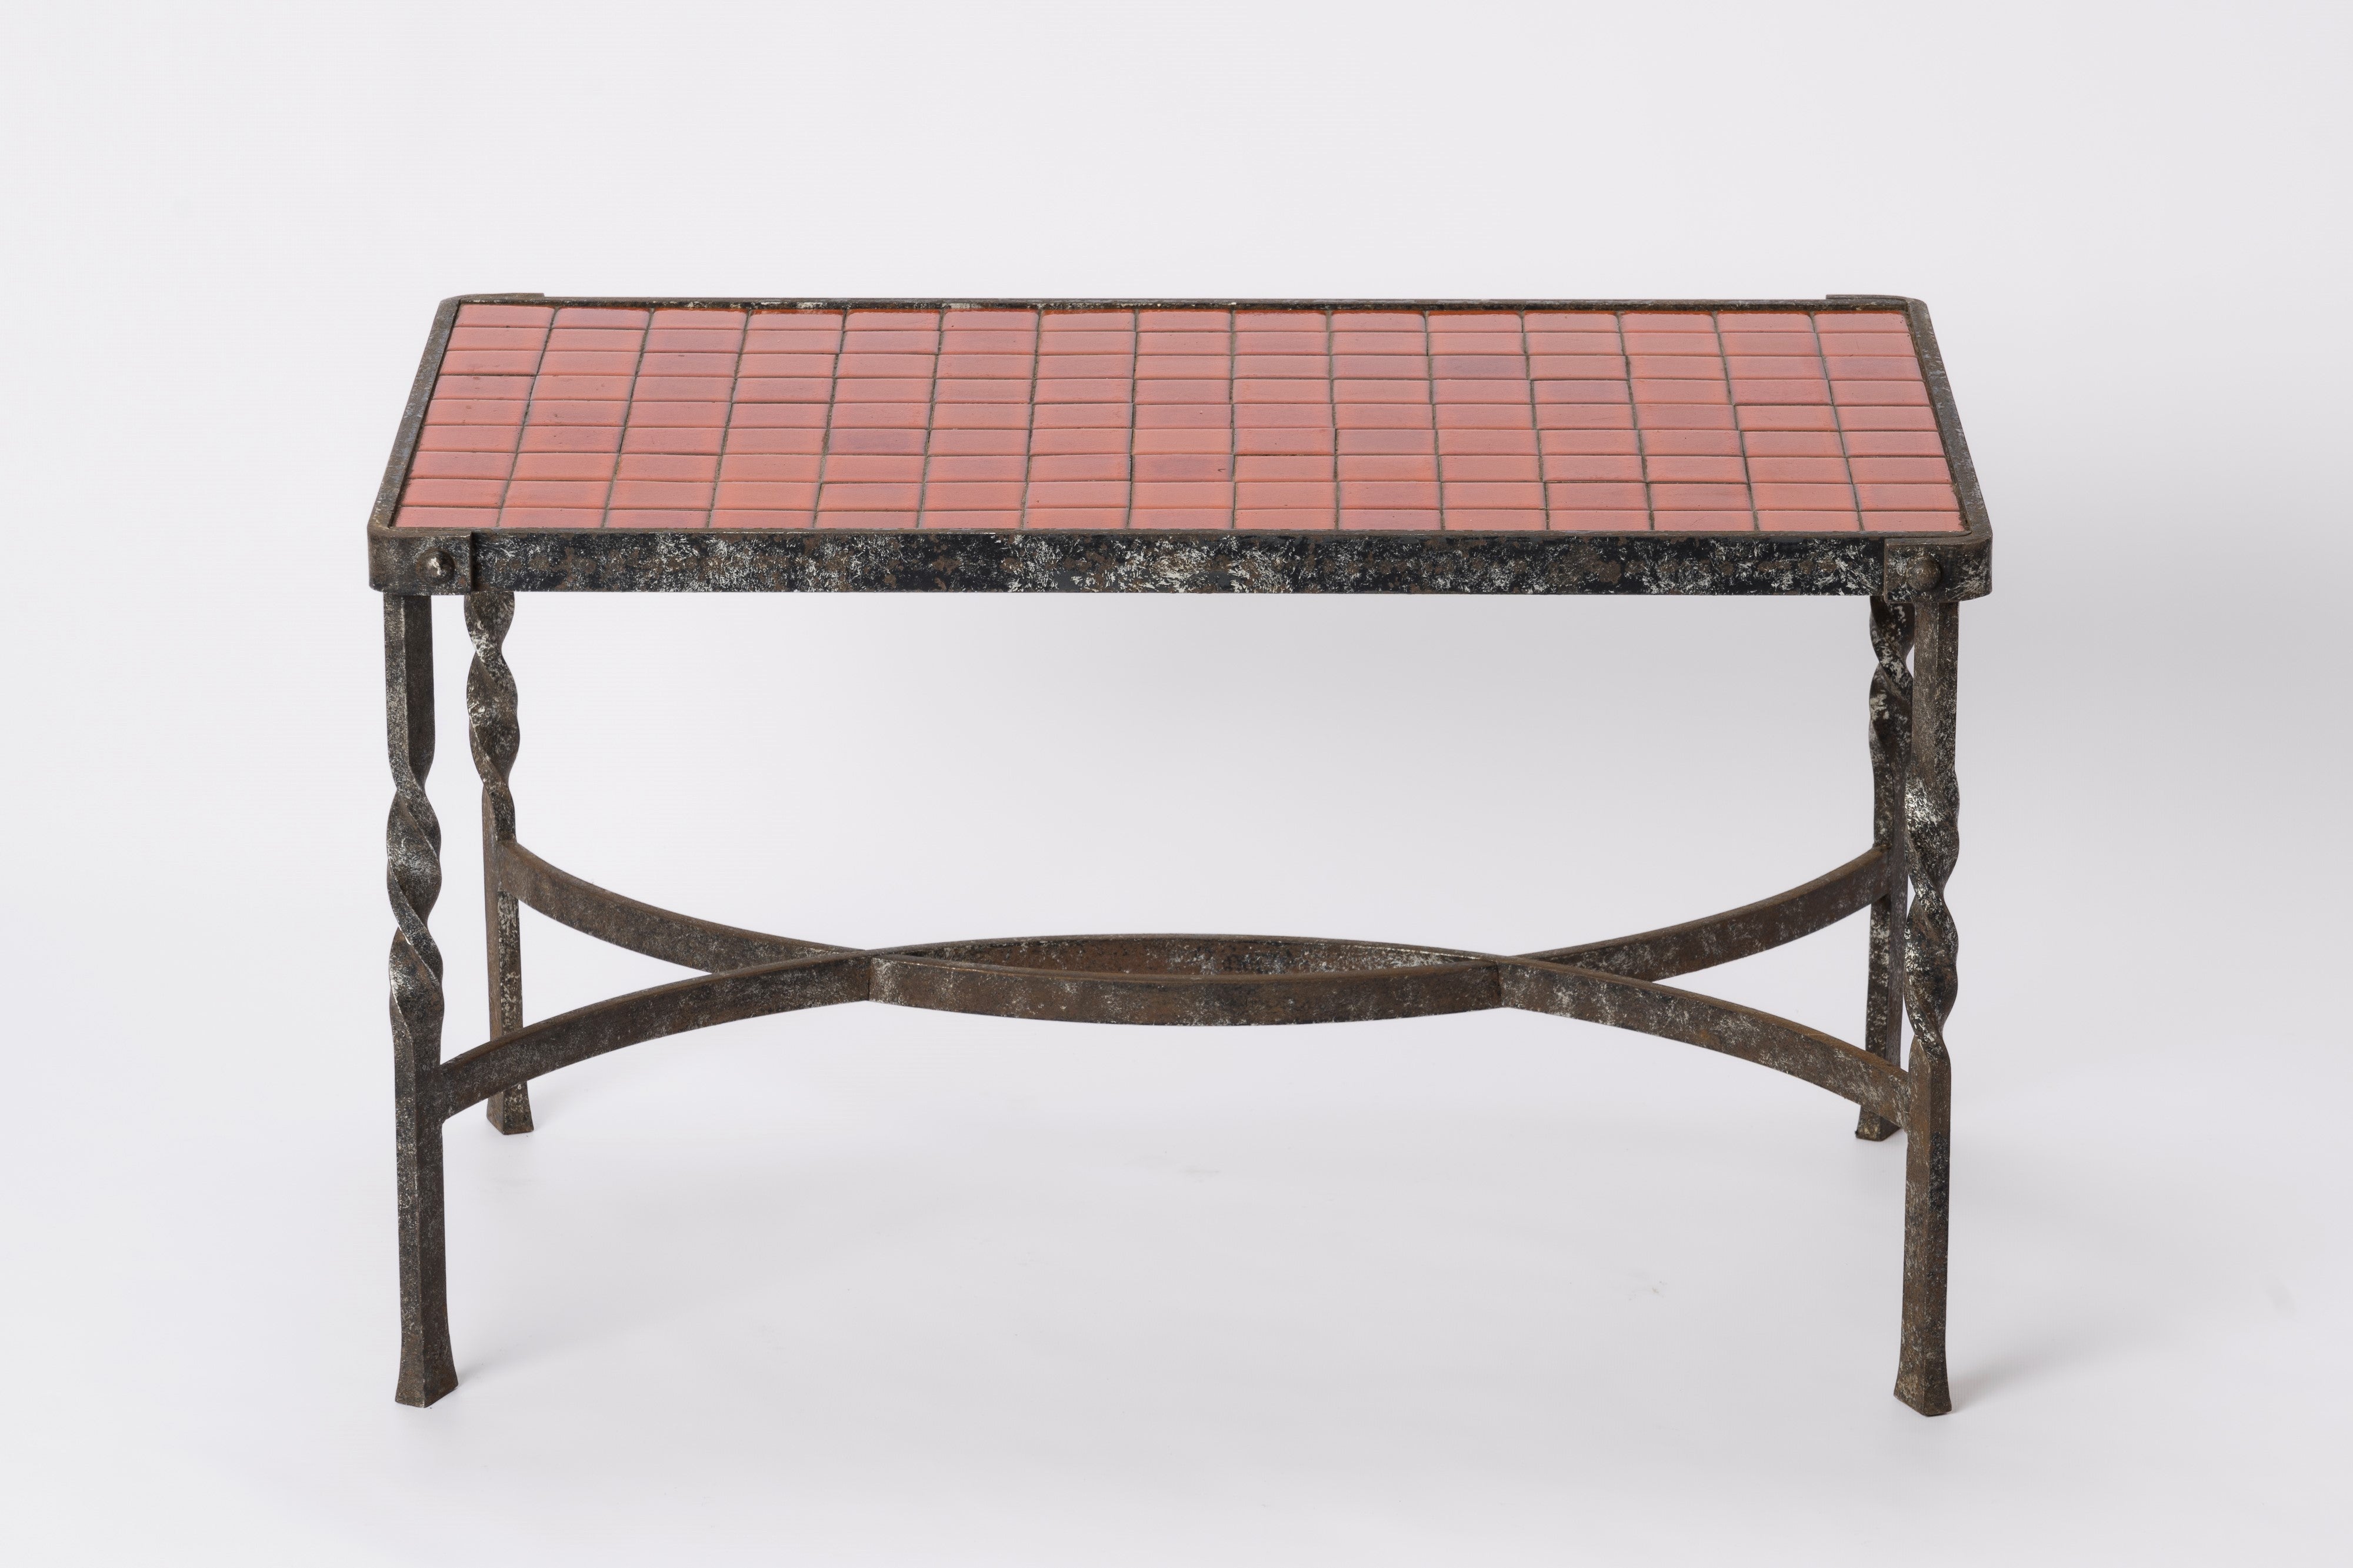 "Corail" Red Ceramic Tiles & Ferronerie d'Art Wrought Iron Coffee Table - 1970s For Sale